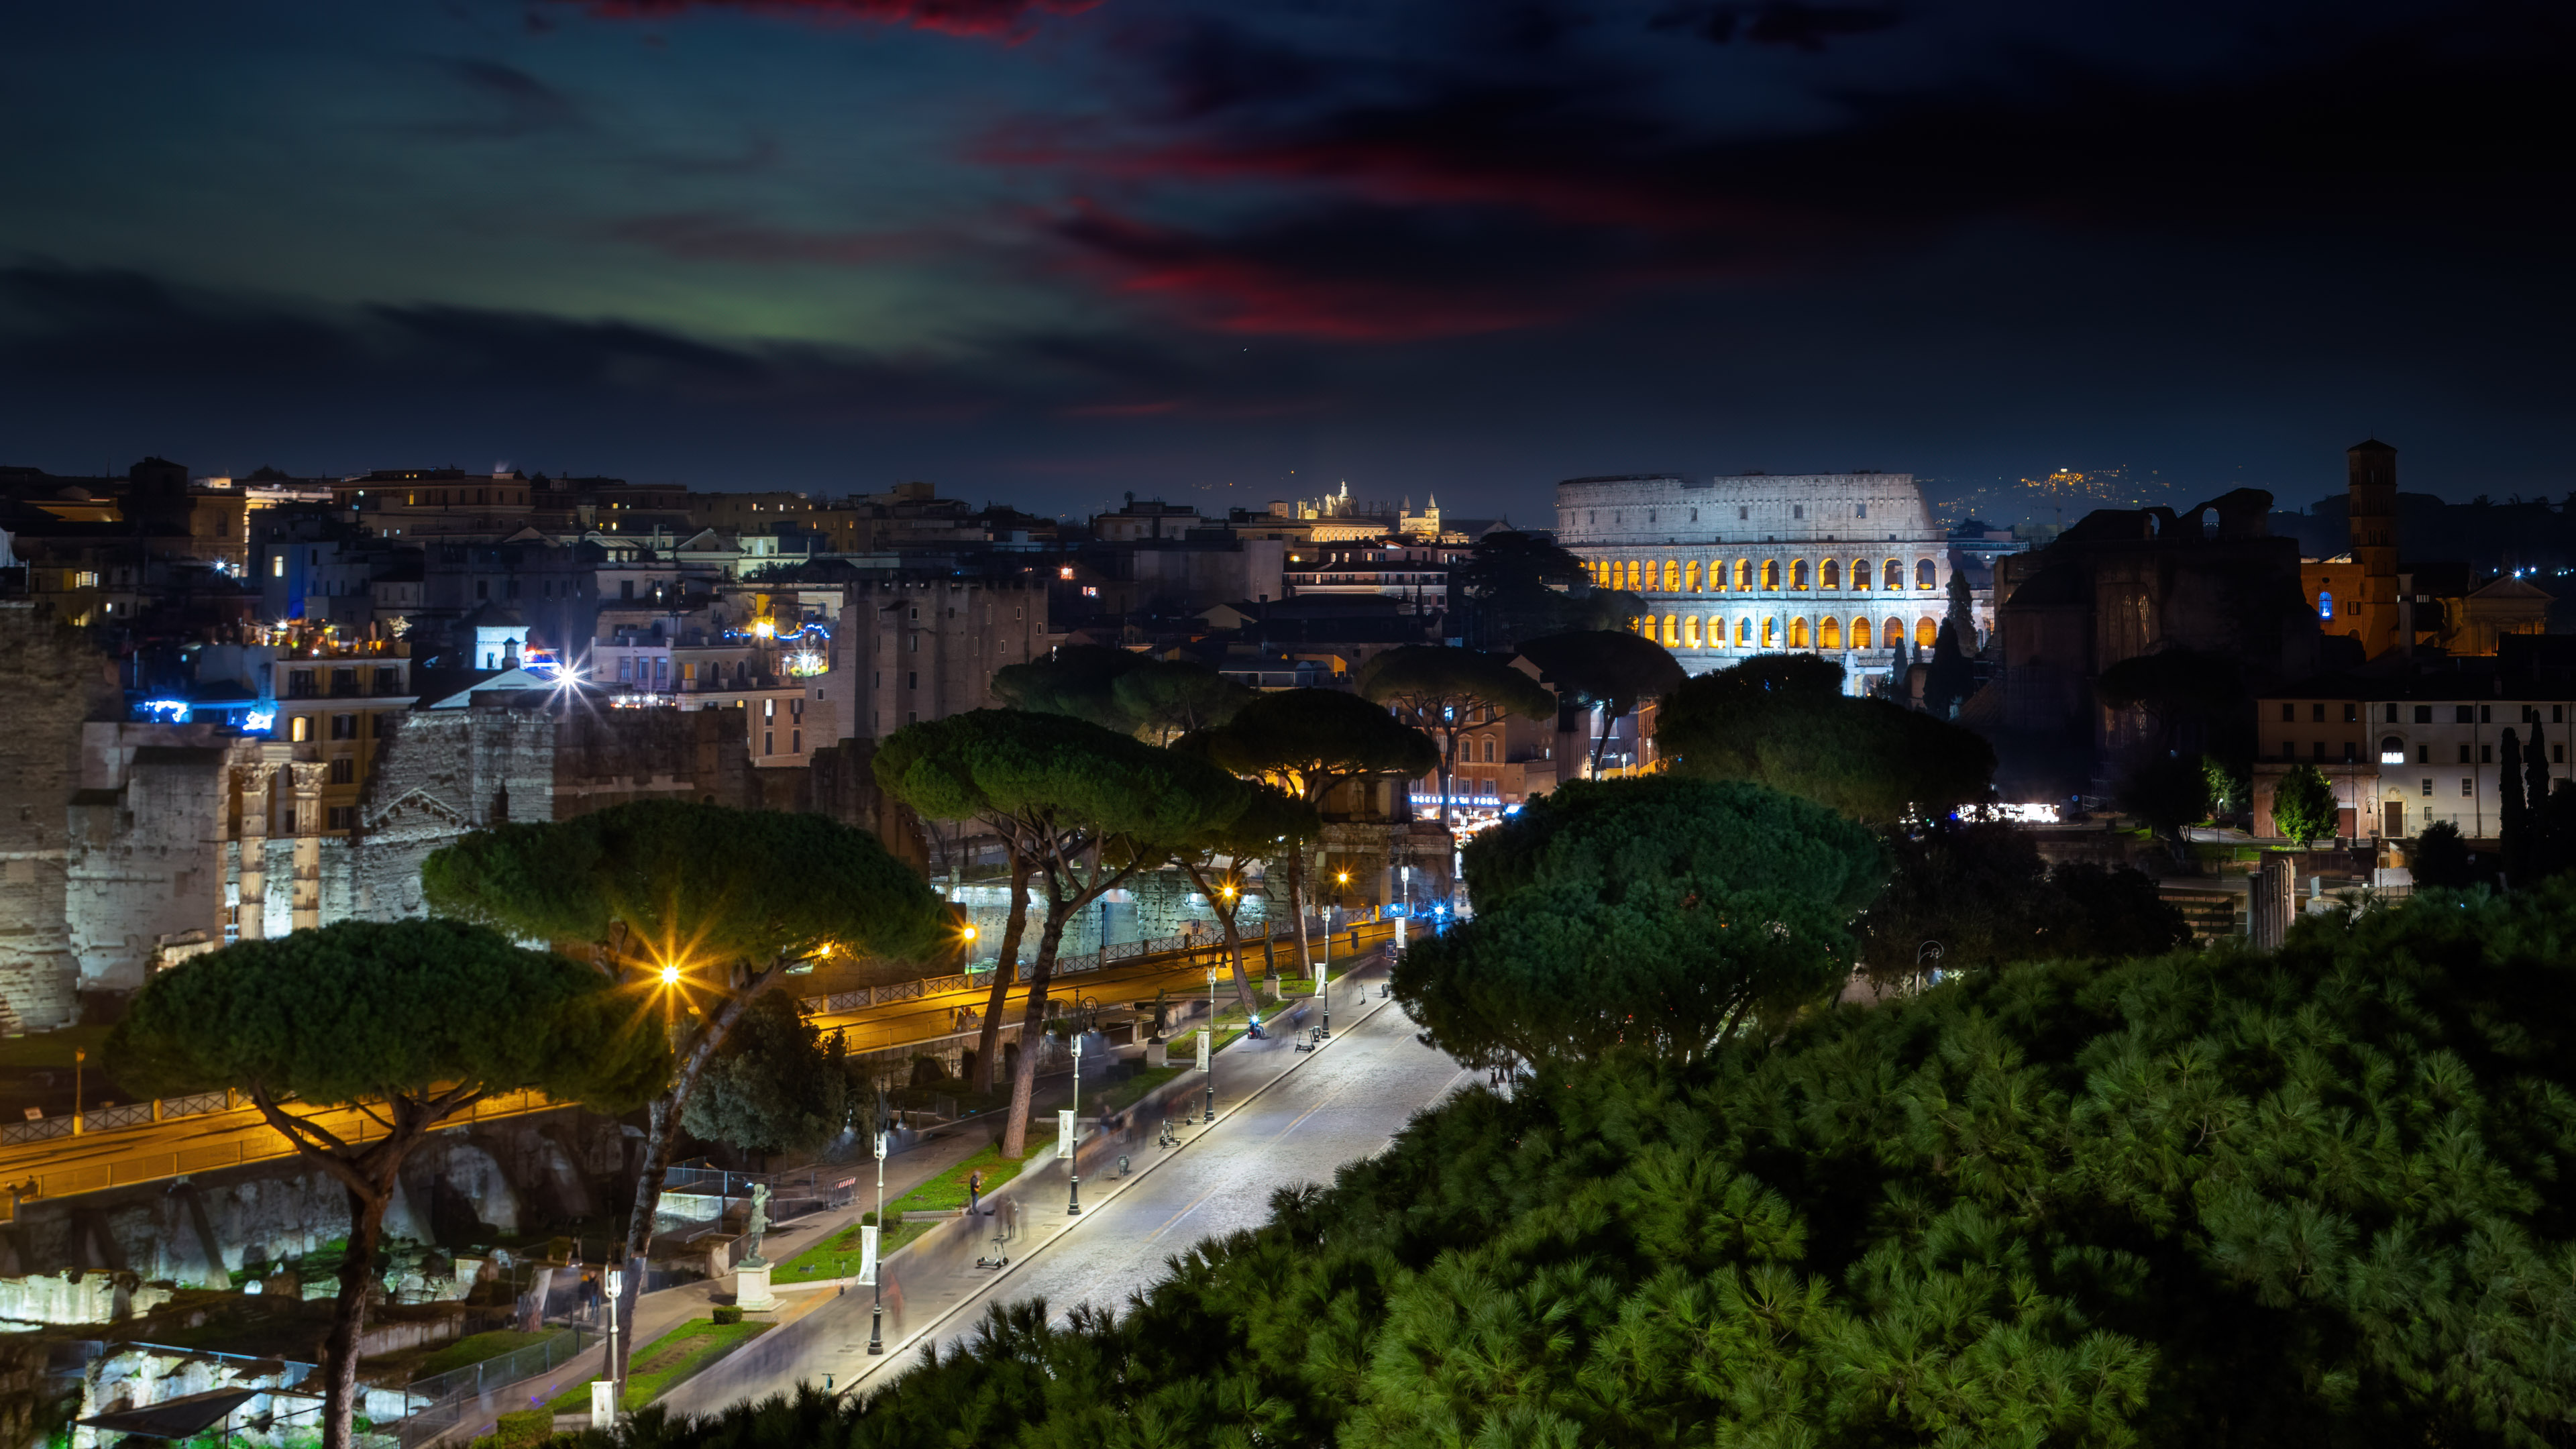 Enjoy the vibrant Rome night city lights wallpaper on your device